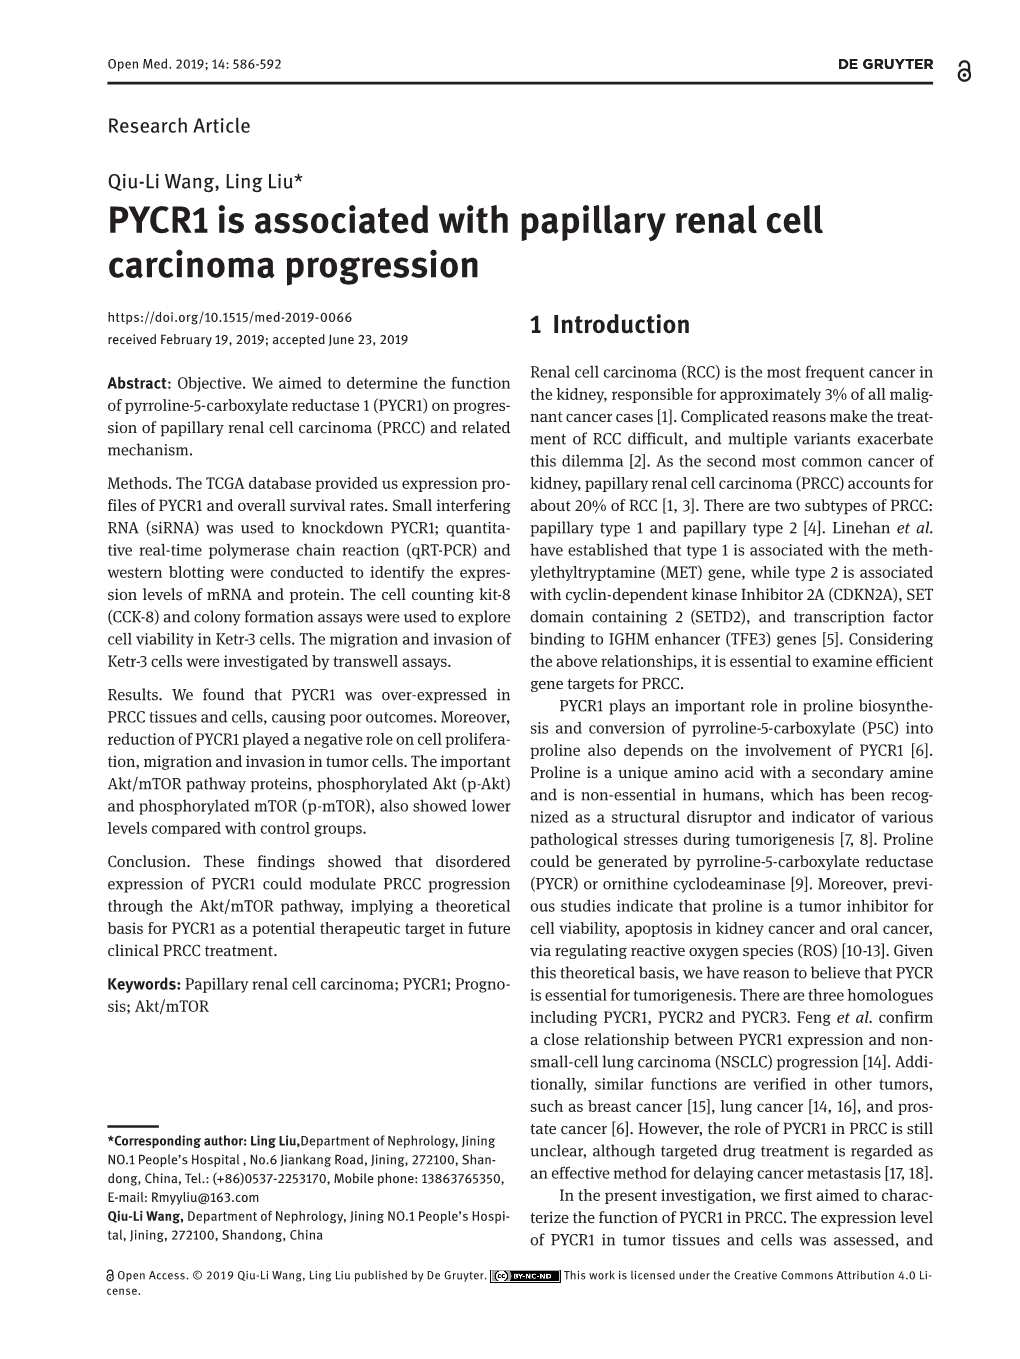 PYCR1 Is Associated with Papillary Renal Cell Carcinoma Progression